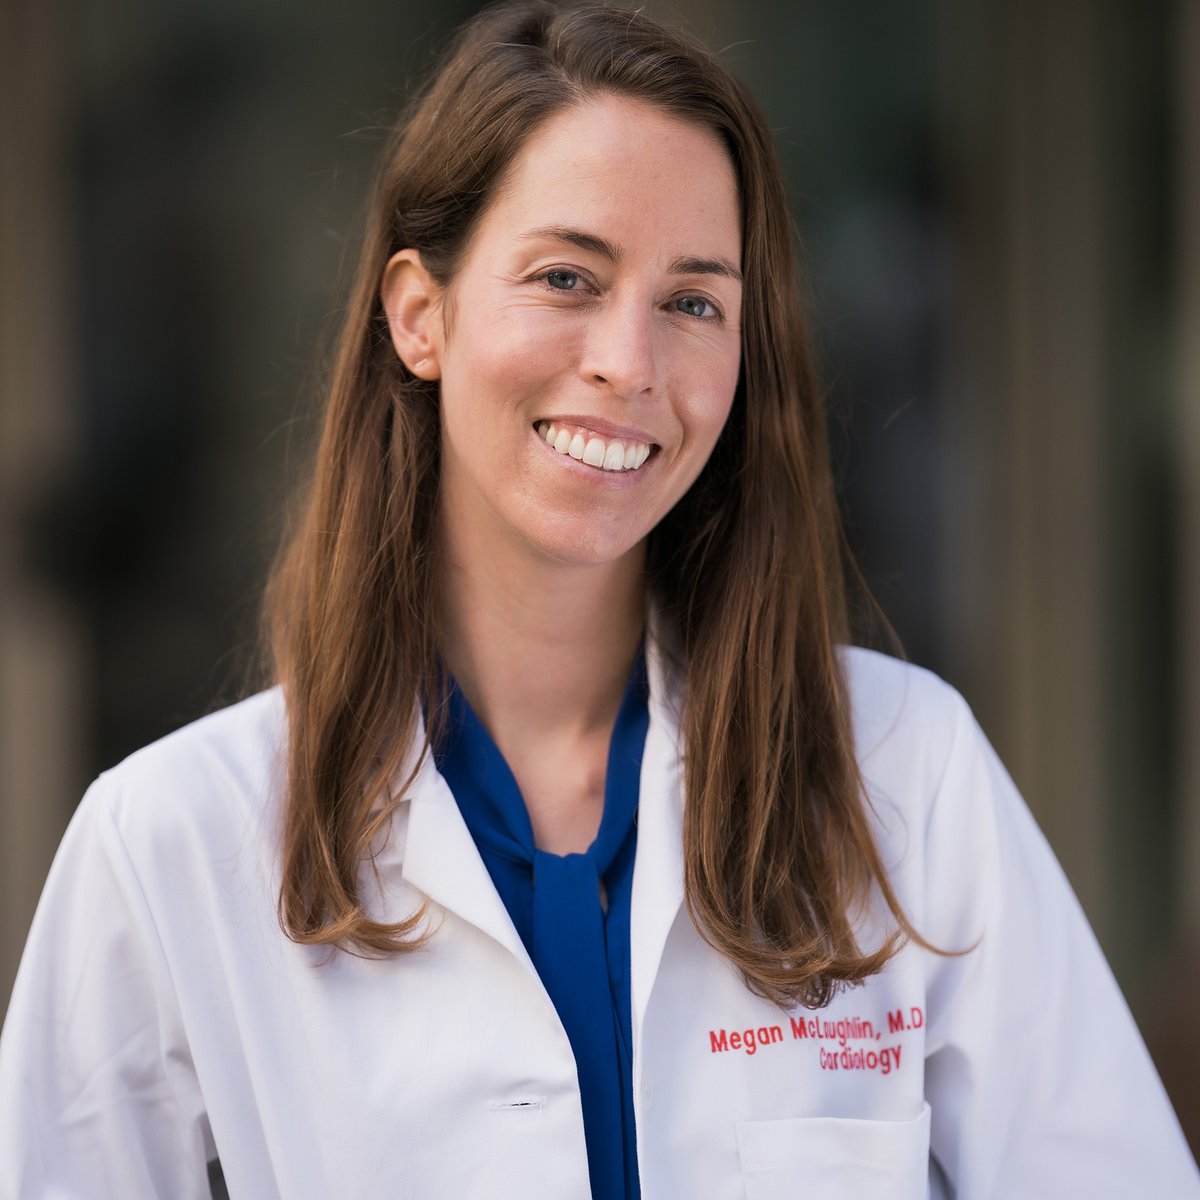 Congrats @meganmclmd on being awarded the @UCSF CFAR (Center for AIDS Research) grant to study hyperlipidemia and cardiovascular risk among patients with HIV in rural Uganda. #UCSFCardiology #ZSFGCards @UCSF_CVfellows